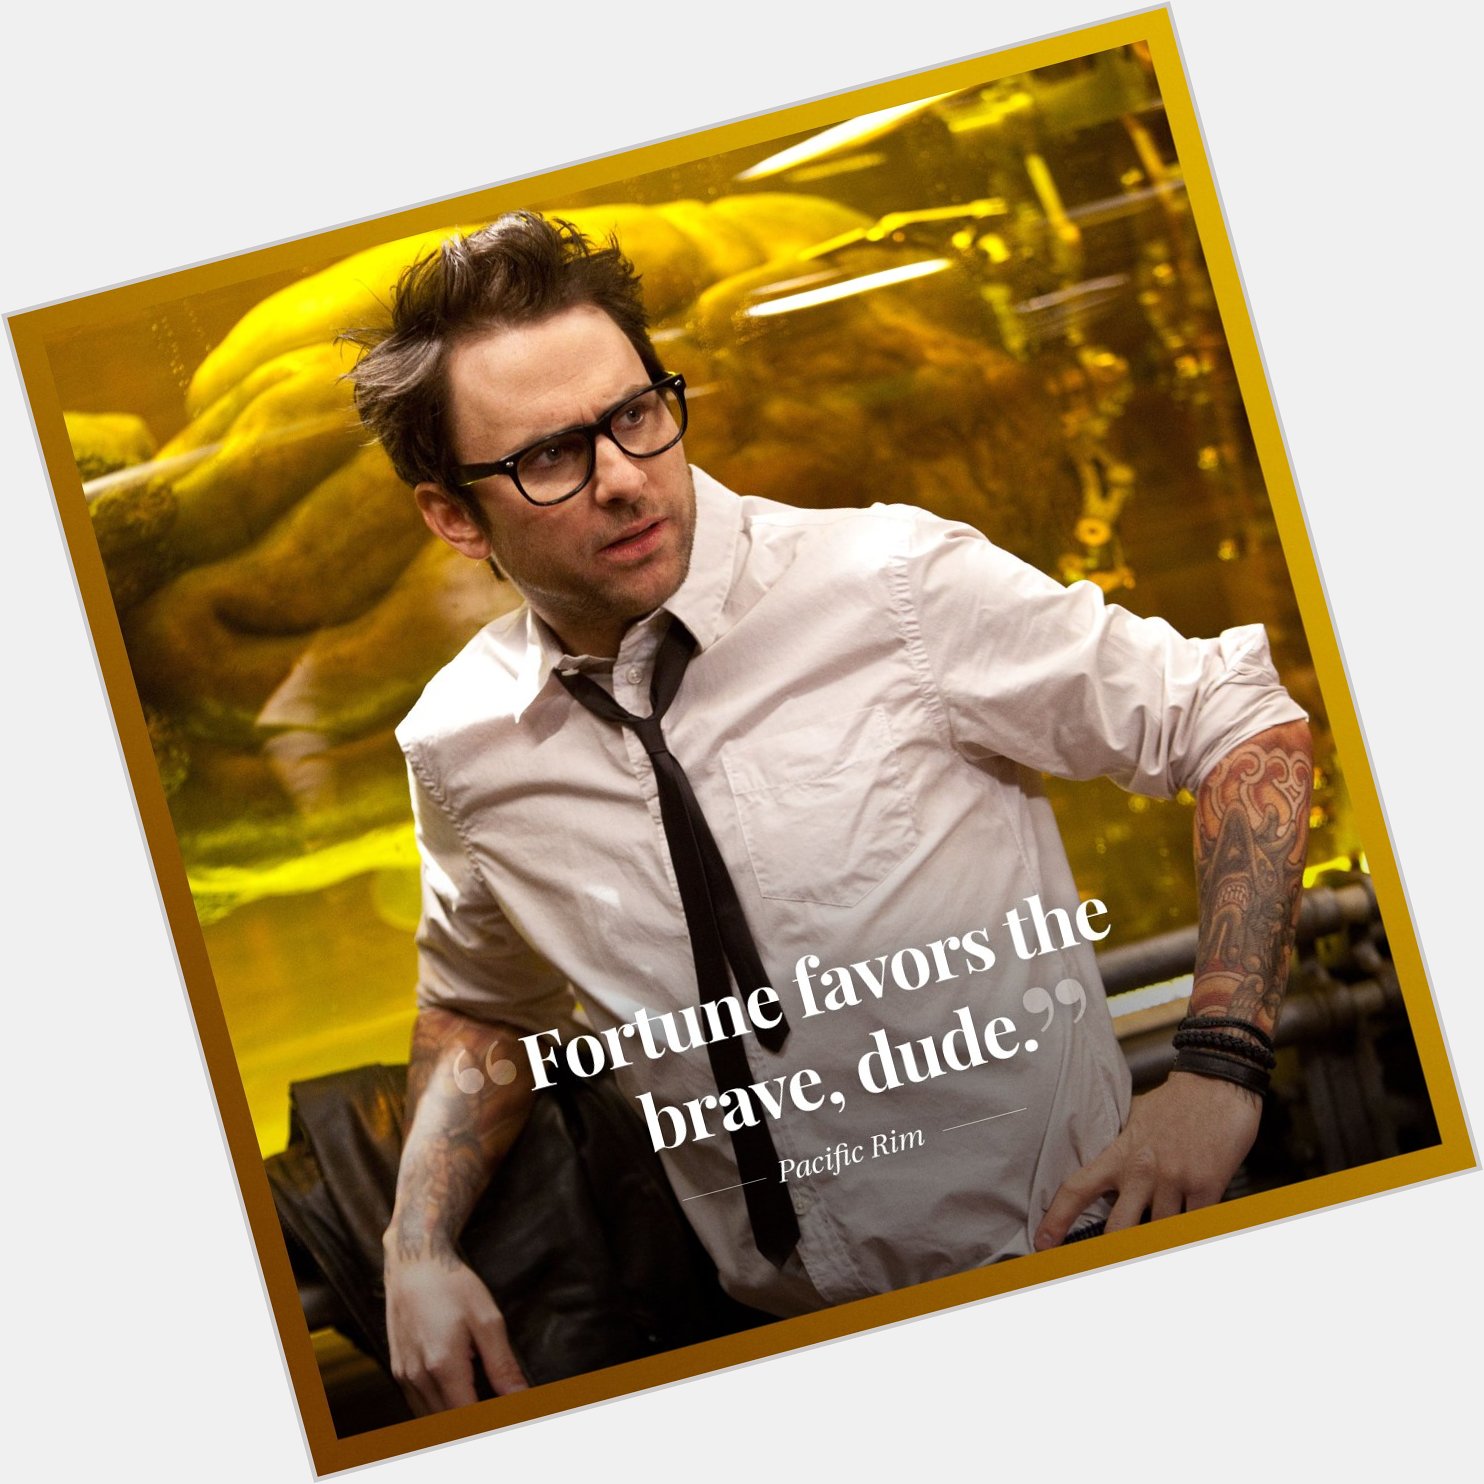 Happy birthday to Charlie Day, the one and only Dr. Newt Geiszler from Pacific Rim and upcoming 